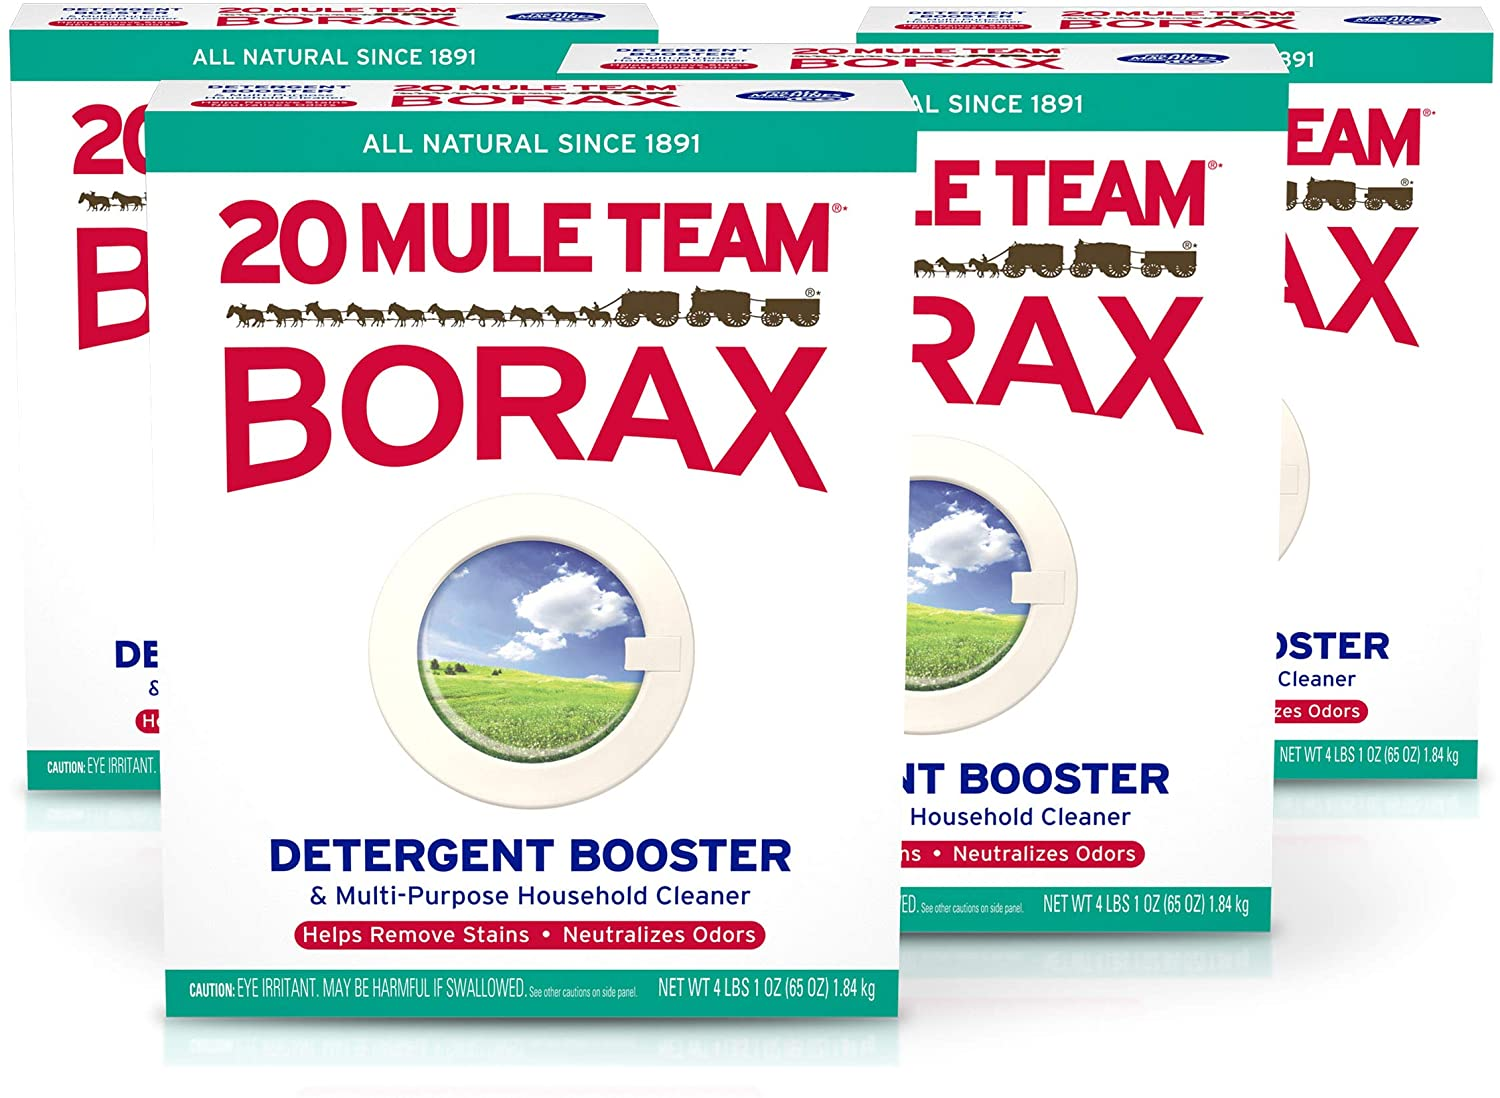 Amazon.com: 20 Mule Team All Natural Borax Laundry Detergent Booster & Multi-Purpose Household Cleaner, 65 Ounce, 4 Count: Health & Personal Care $0.00